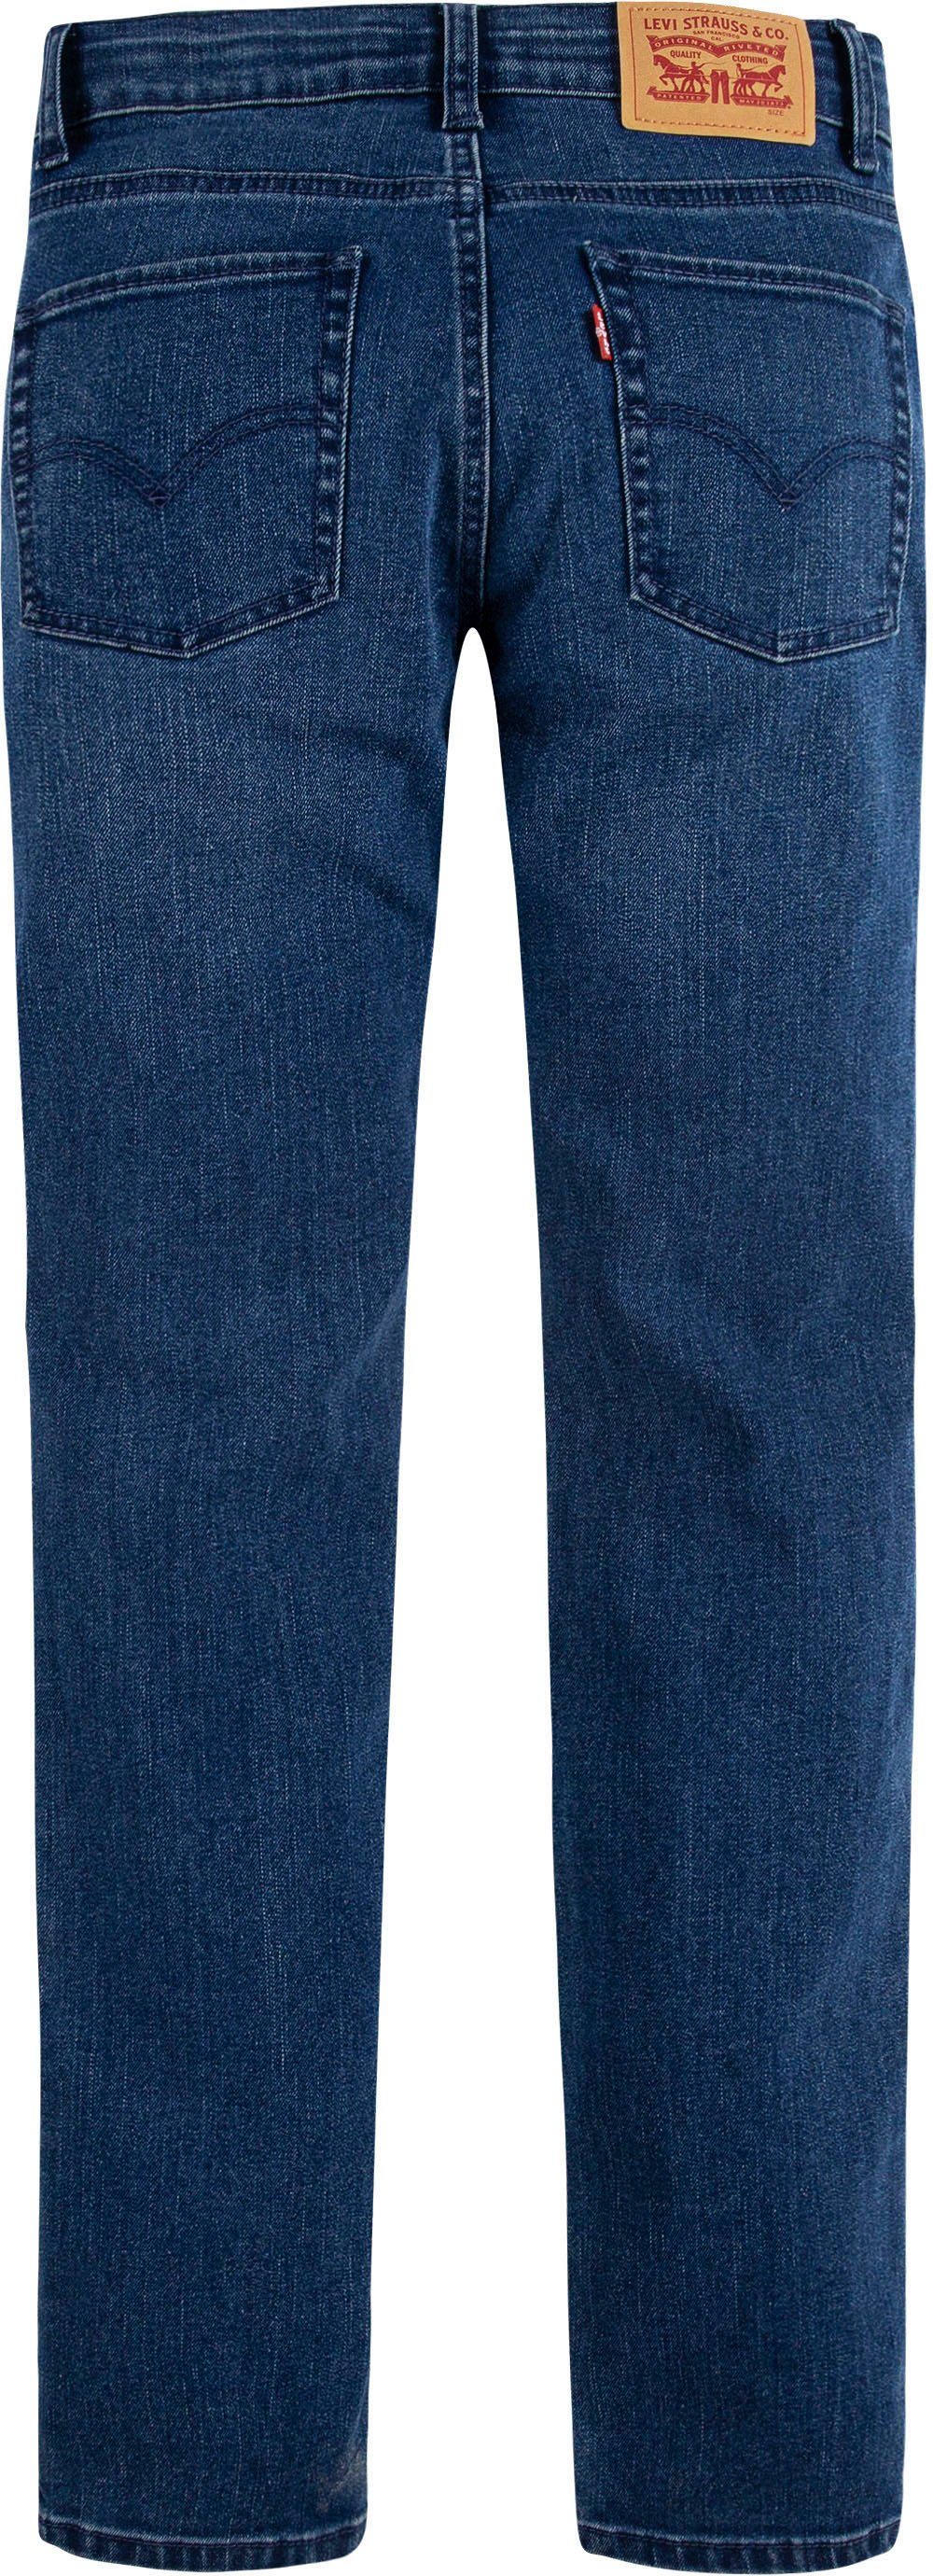 Skinny-fit-Jeans FIT blue used BOYS for JEANS SKINNY heavy Levi's® Kids 510